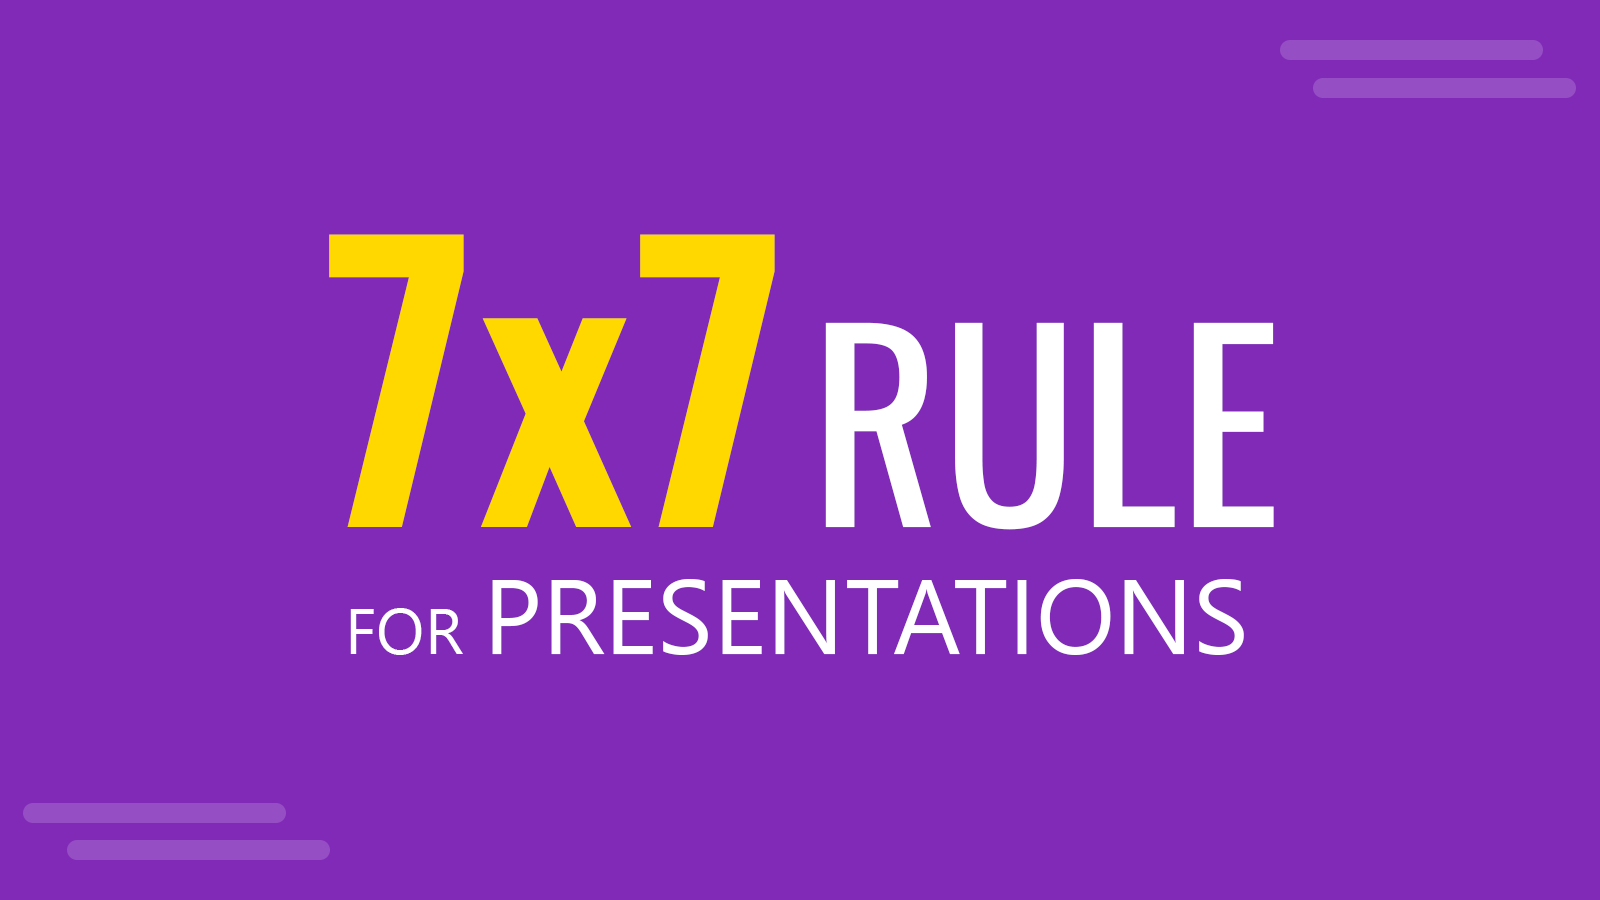 7x7 Rule for Presentations